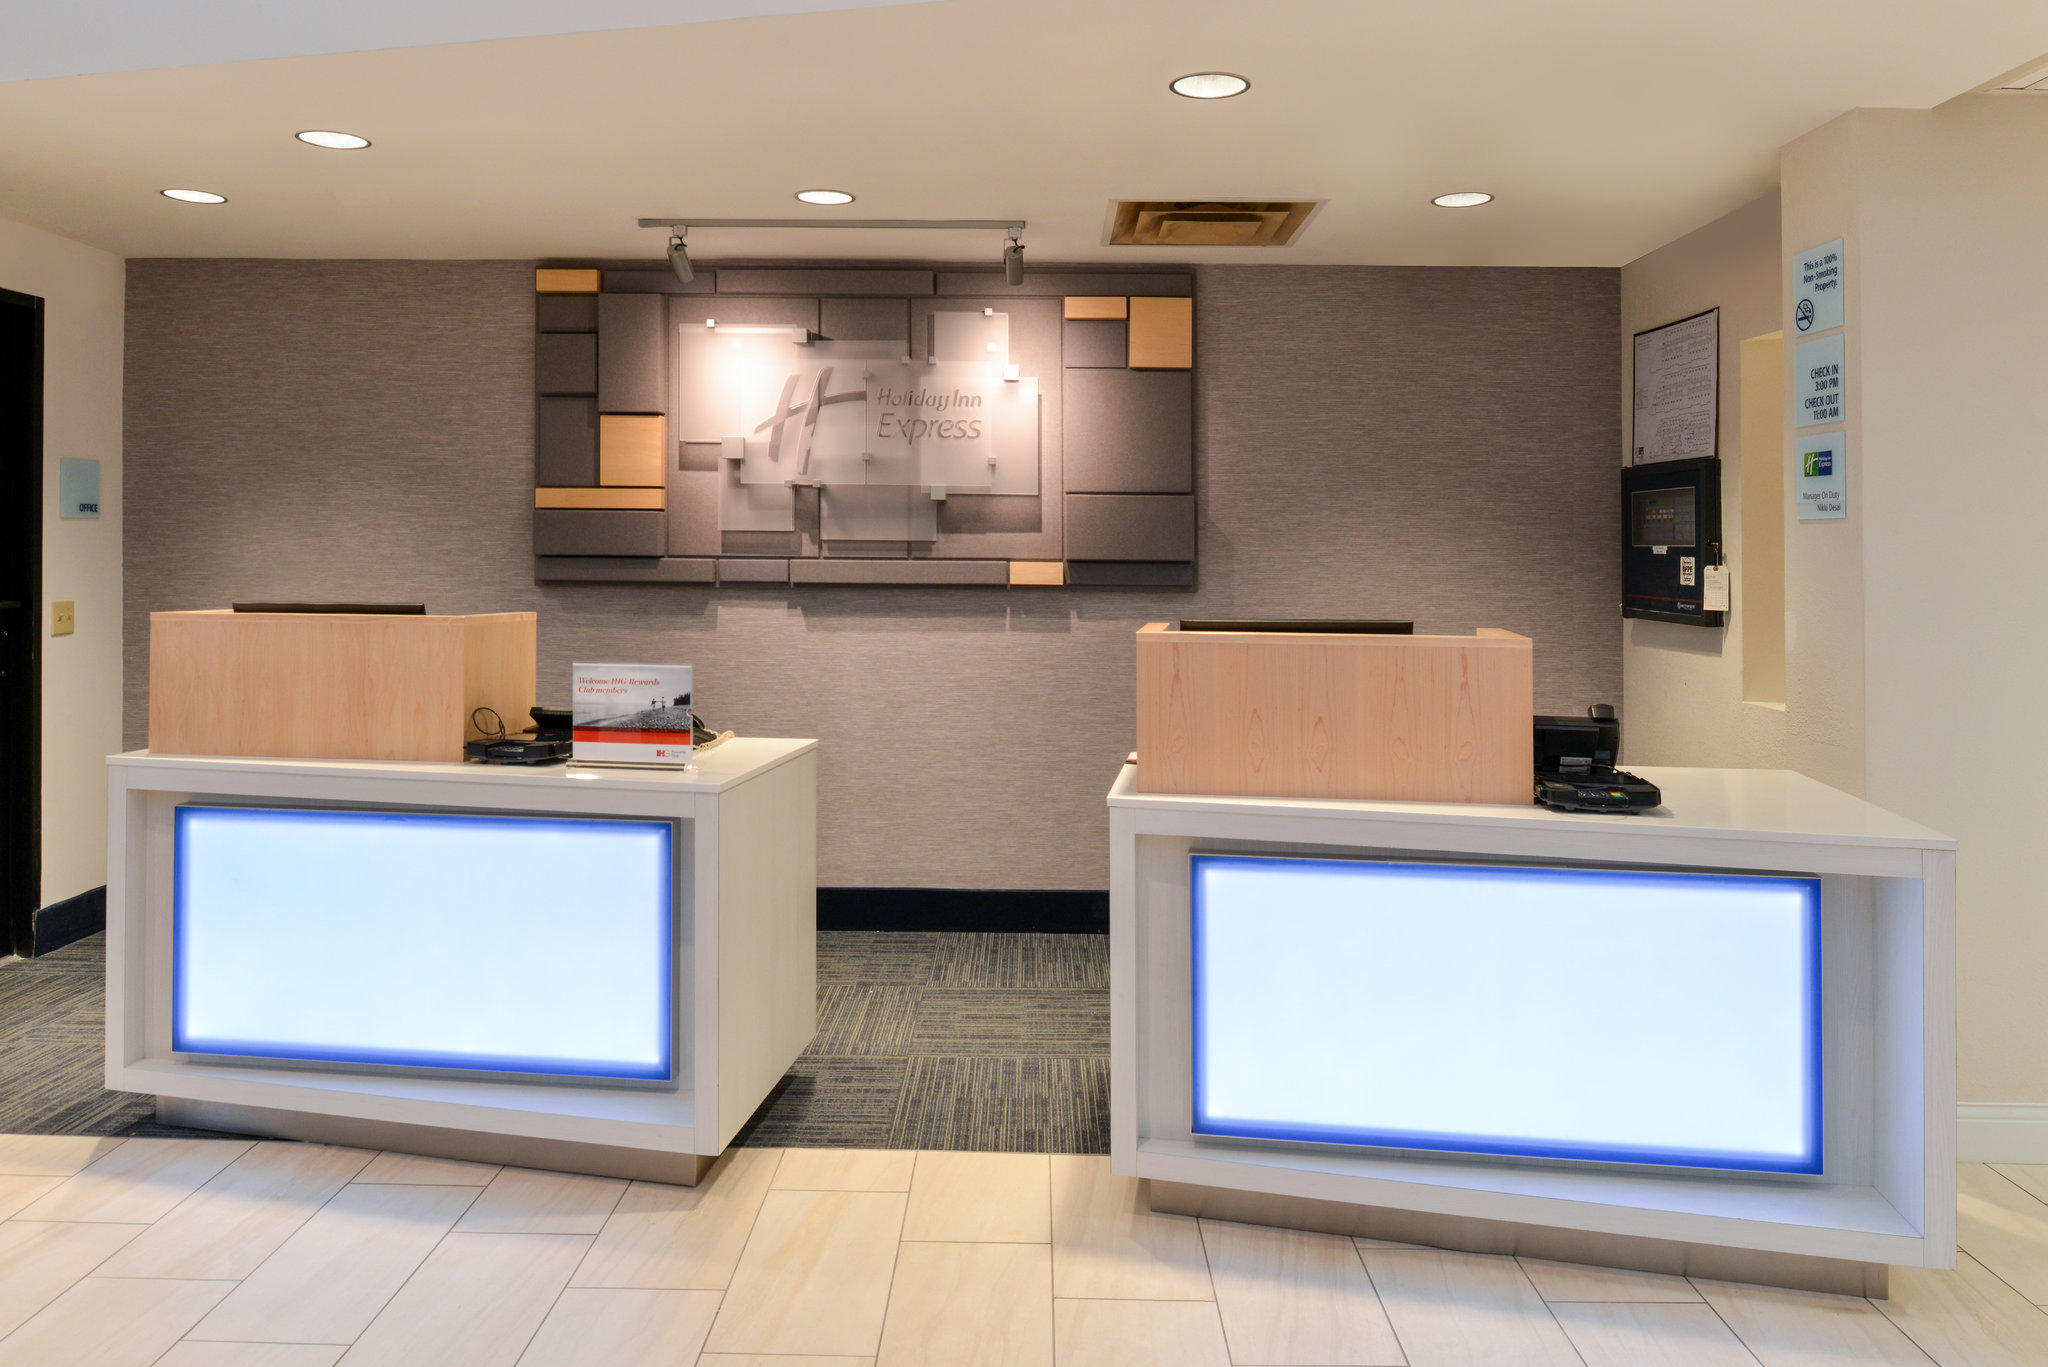 Holiday Inn Express & Suites Raleigh NE - Medical Ctr Area, an IHG Hotel Raleigh (919)256-2800